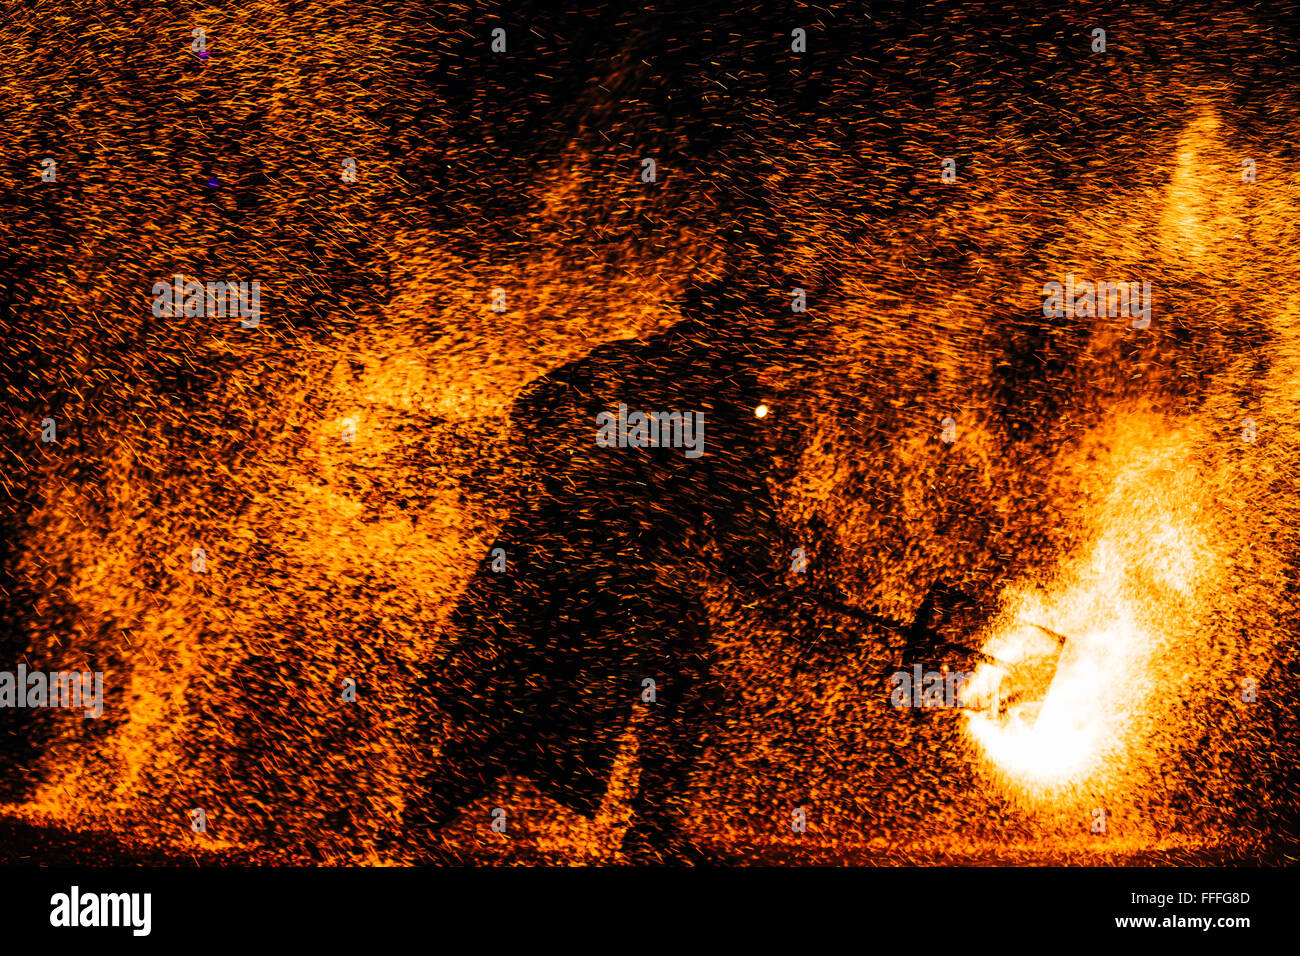 Fire show at night. Black silhouette of man against backdrop of fiery sparks Stock Photo